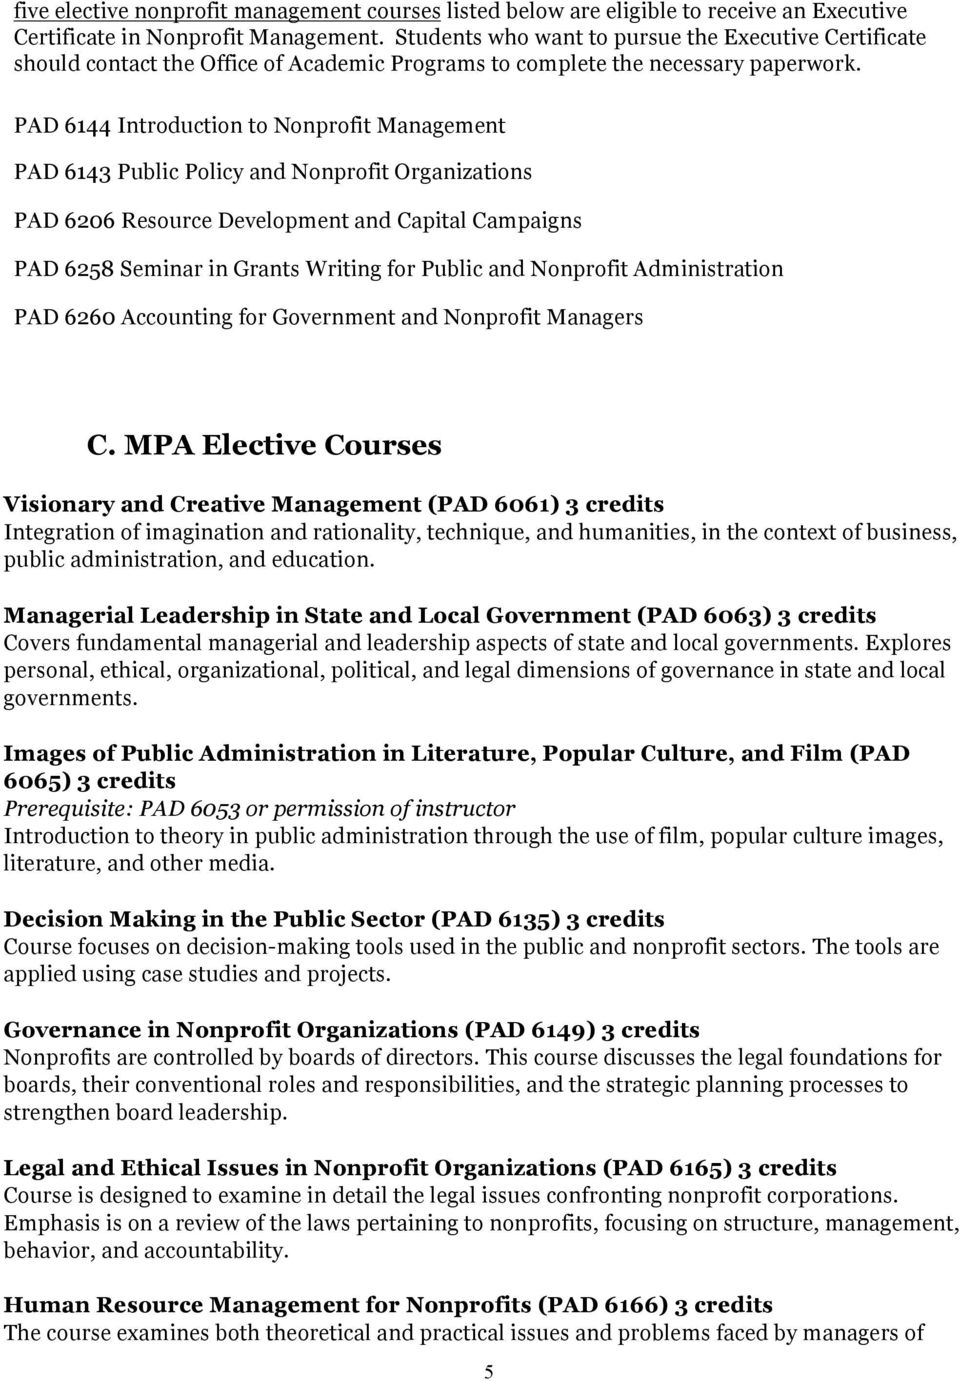 PAD 6144 Introduction to Nonprofit Management PAD 6143 Public Policy and Nonprofit Organizations PAD 6206 Resource Development and Capital Campaigns PAD 6258 Seminar in Grants Writing for Public and